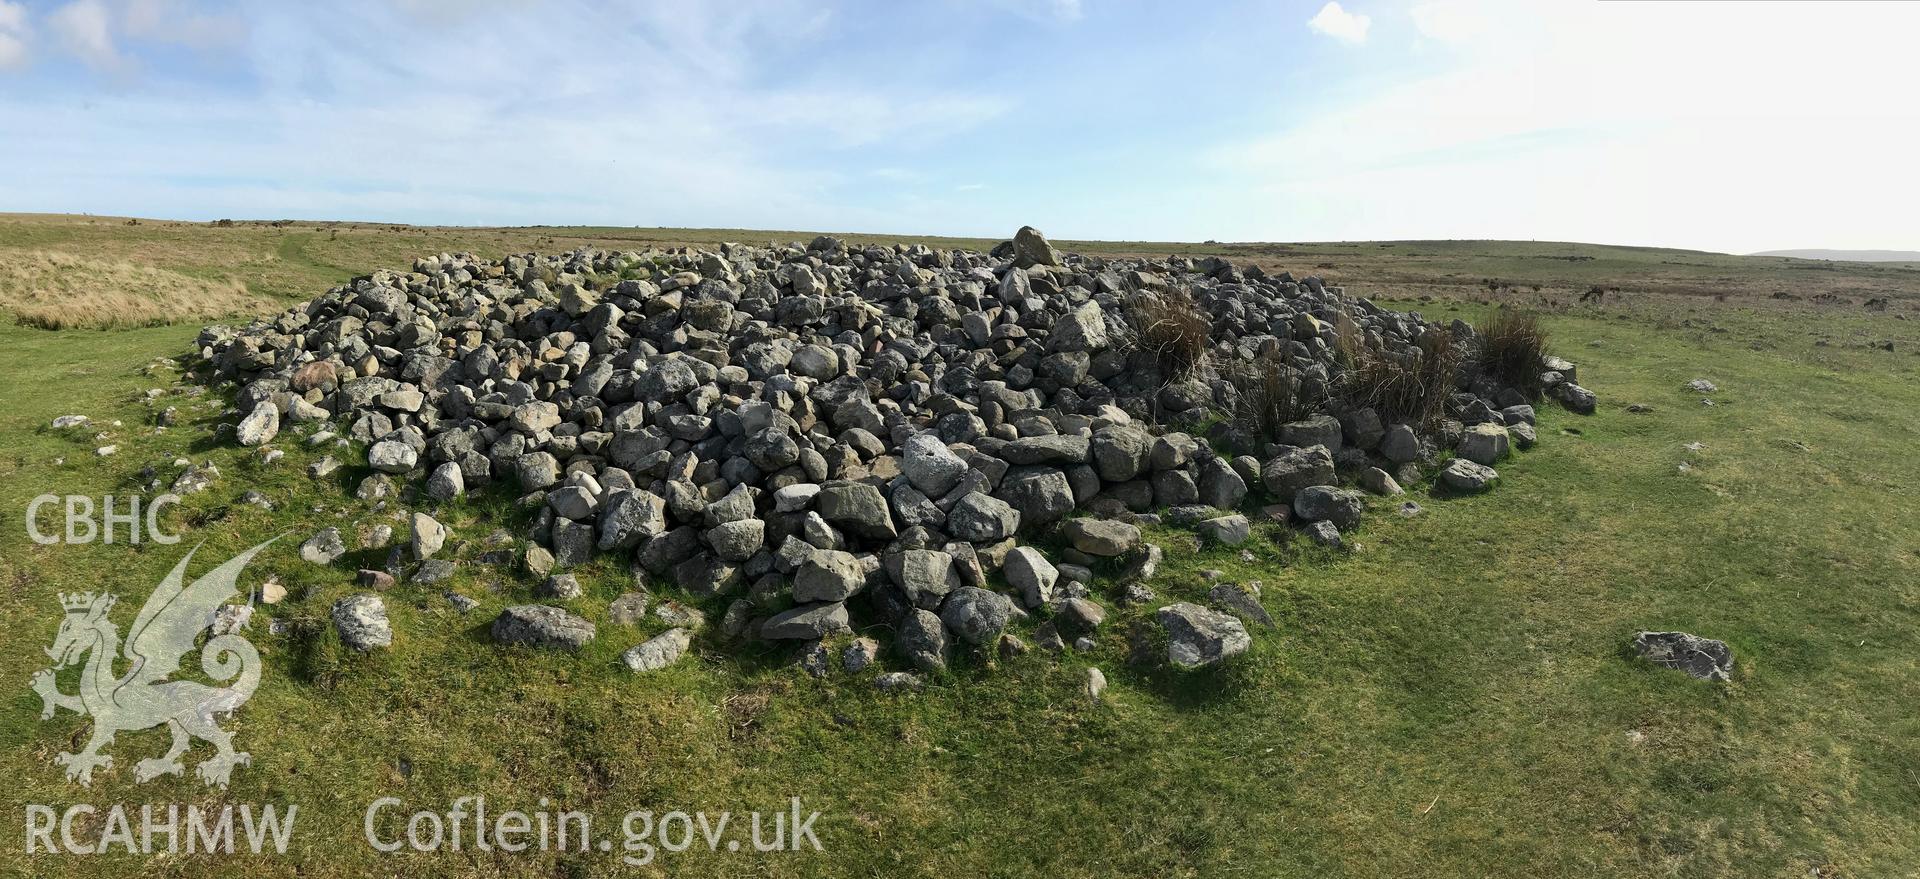 Colour photo showing view of Great Carn, Cefn Bryn, taken by Paul R. Davis, 10th May 2018.